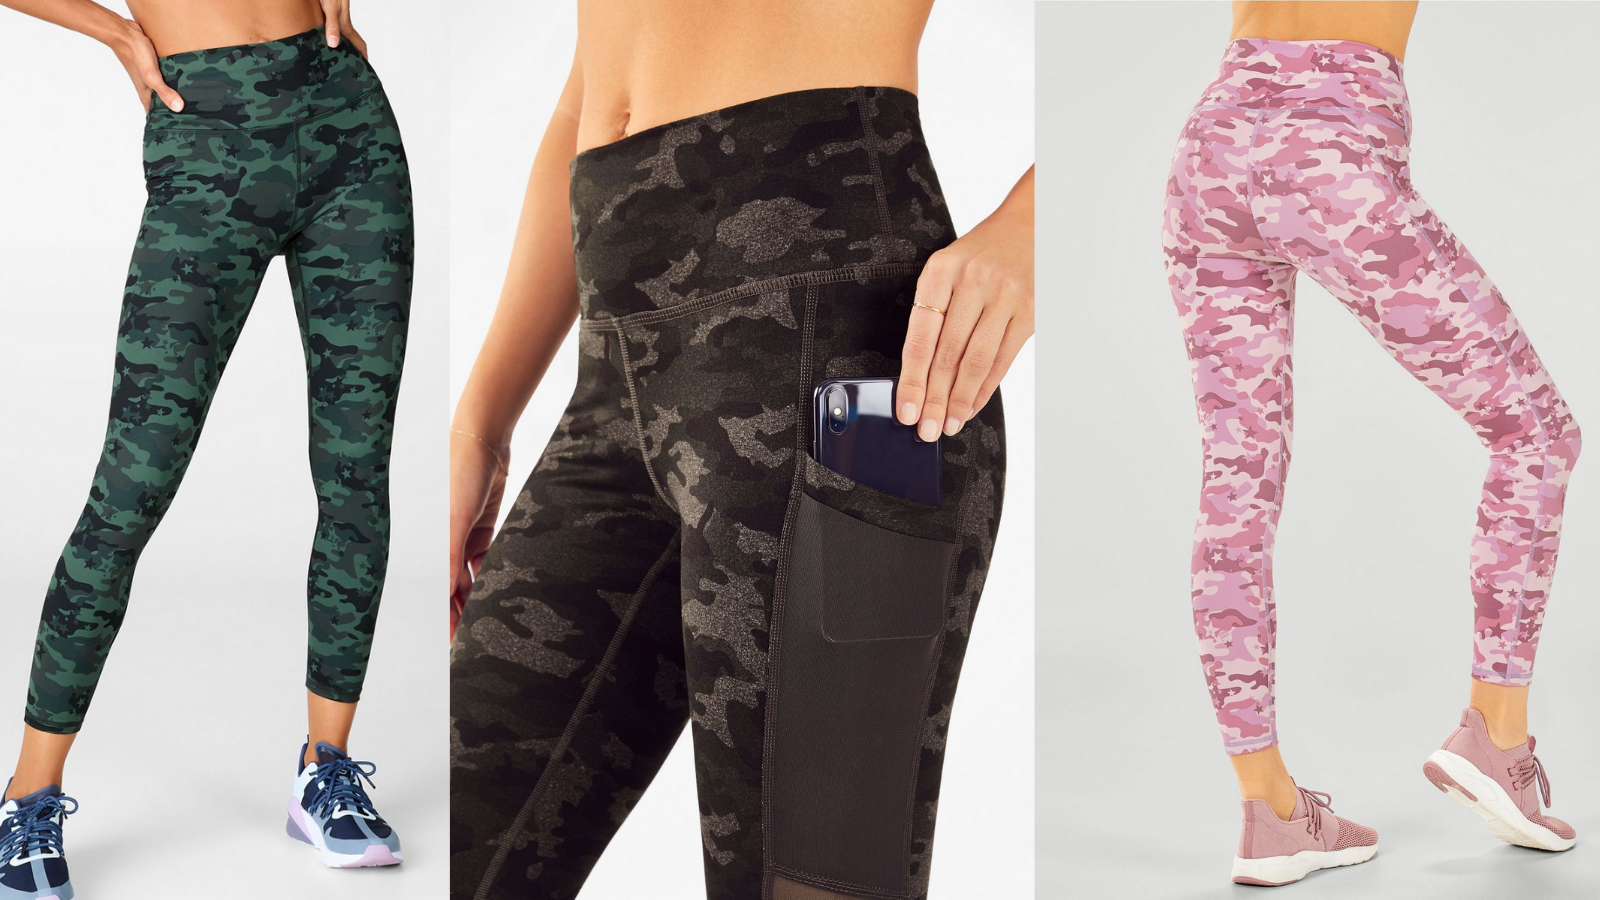 Fabletics' gaffe led to Veterans Day discount on yoga pants, but